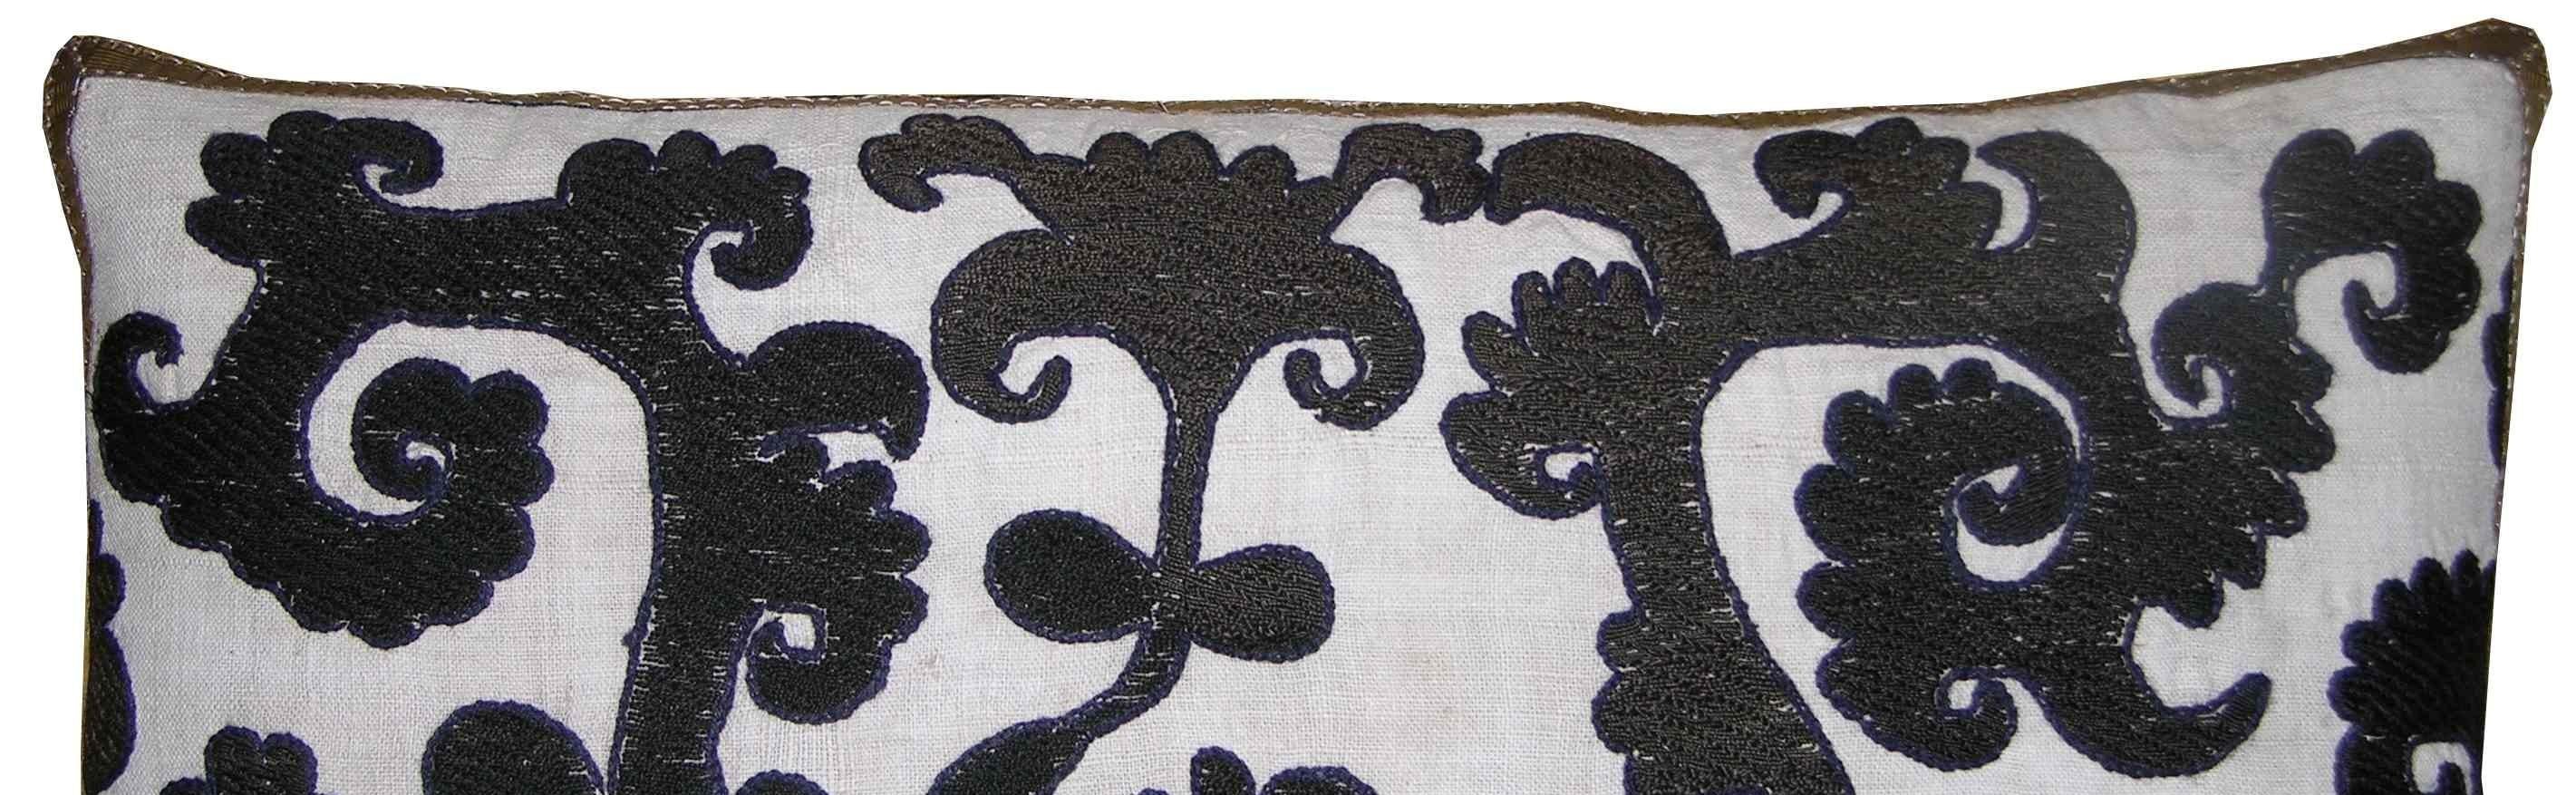 Unknown 1900 Antique Susani Embroidery Pillow - 21 X 12 For Sale